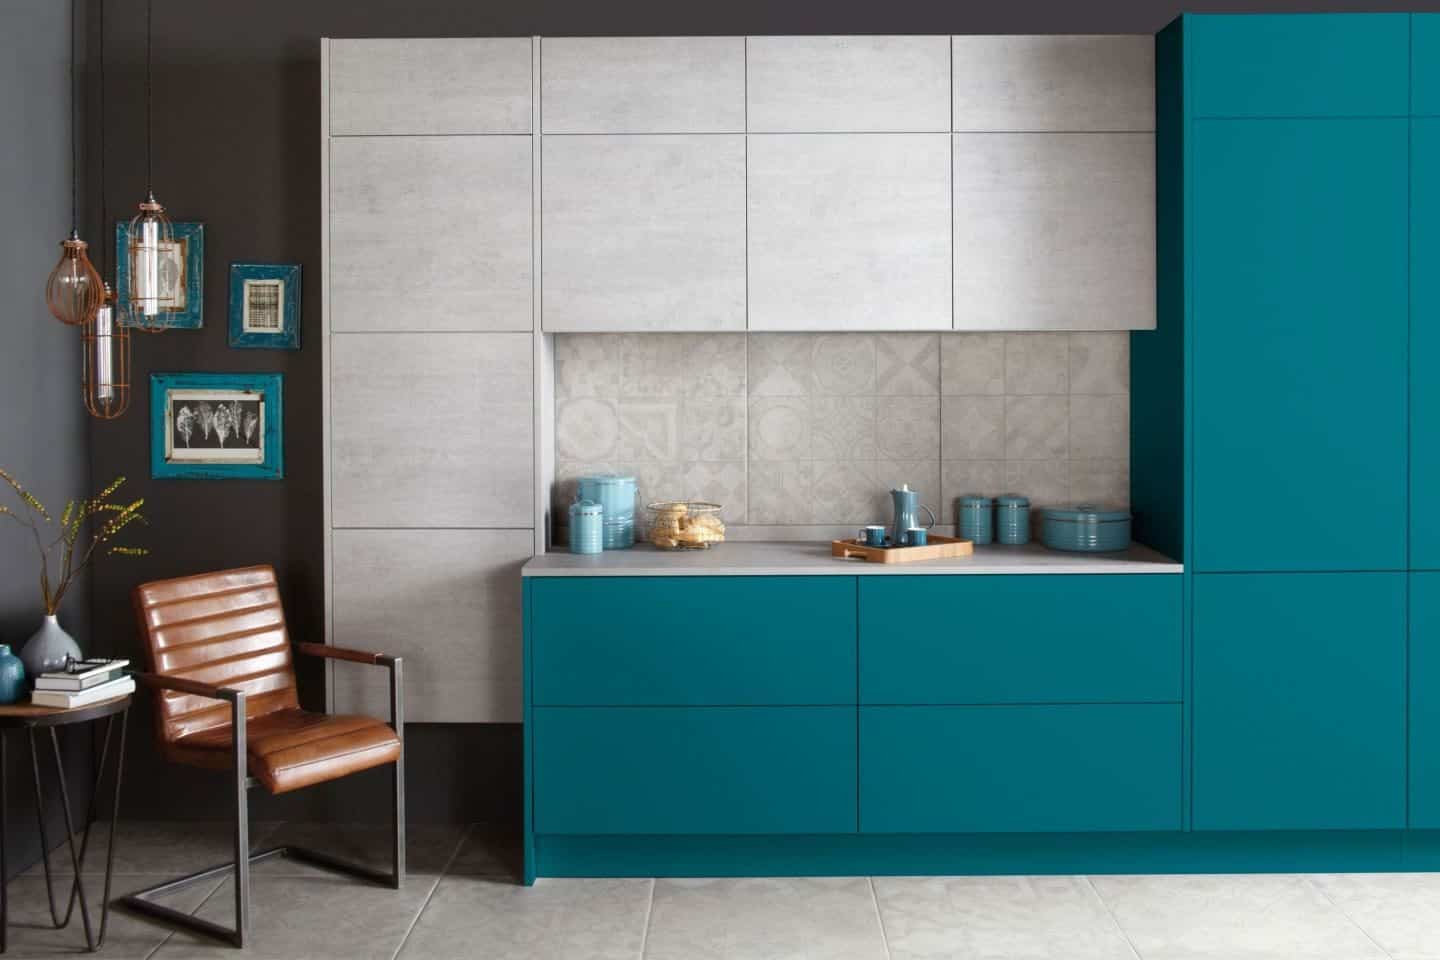 Burbidge Otto in Bespoke Painted Teal and Concrete From £7,500